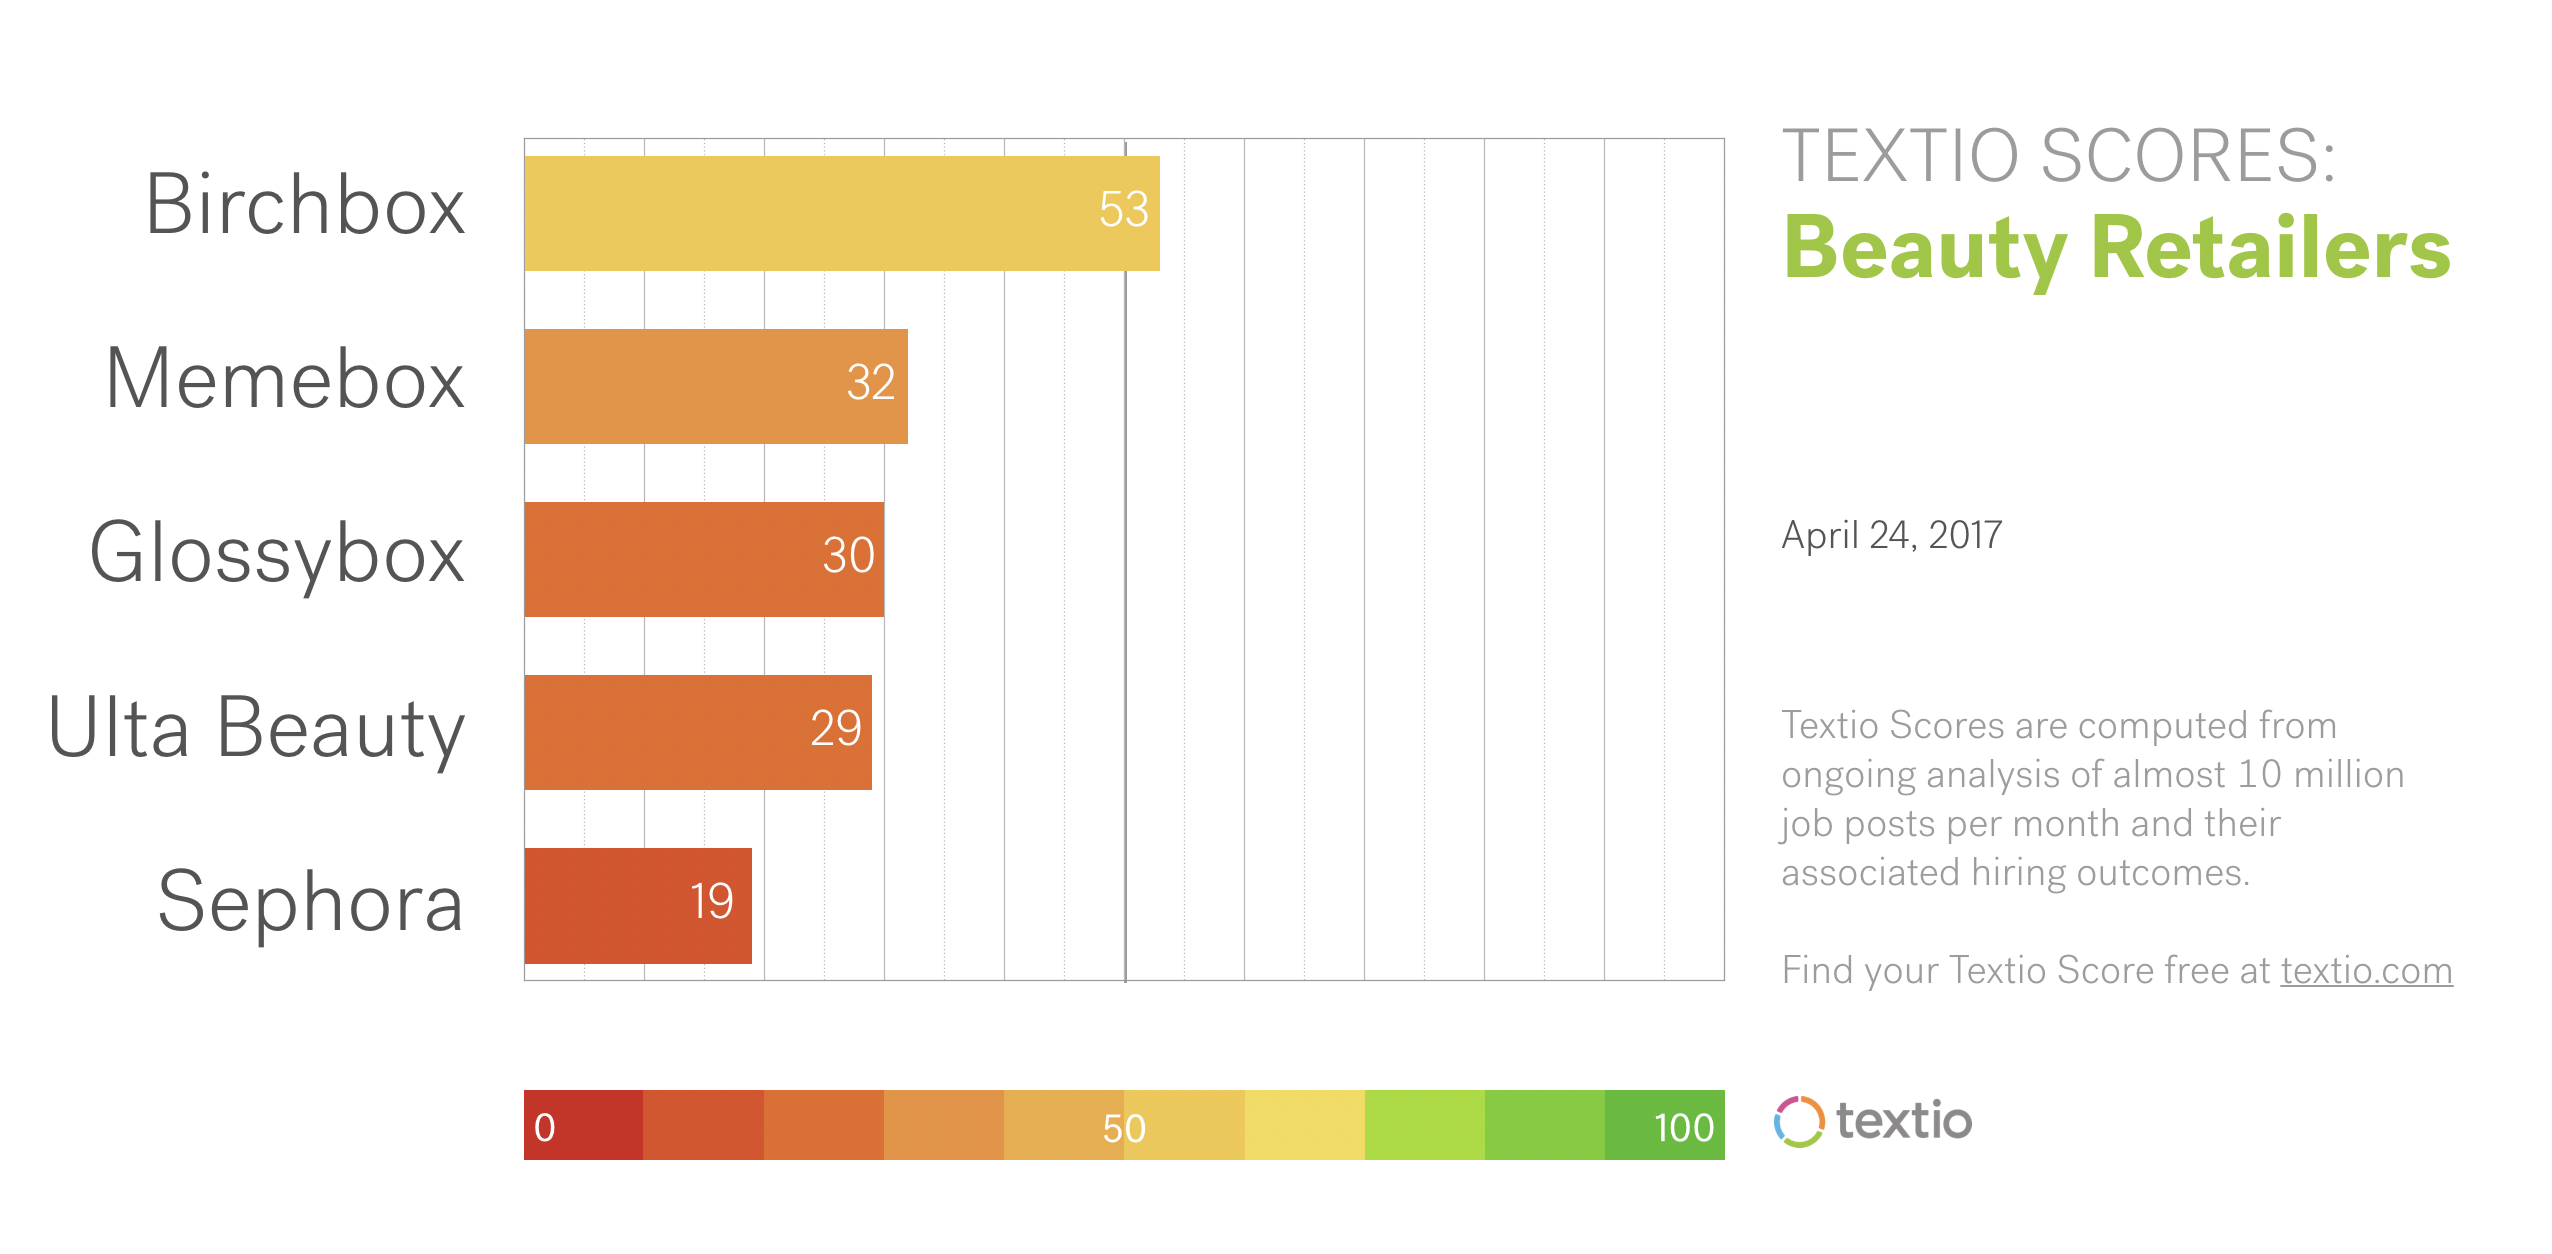 Bar chart of Textio Scores for beauty retailers